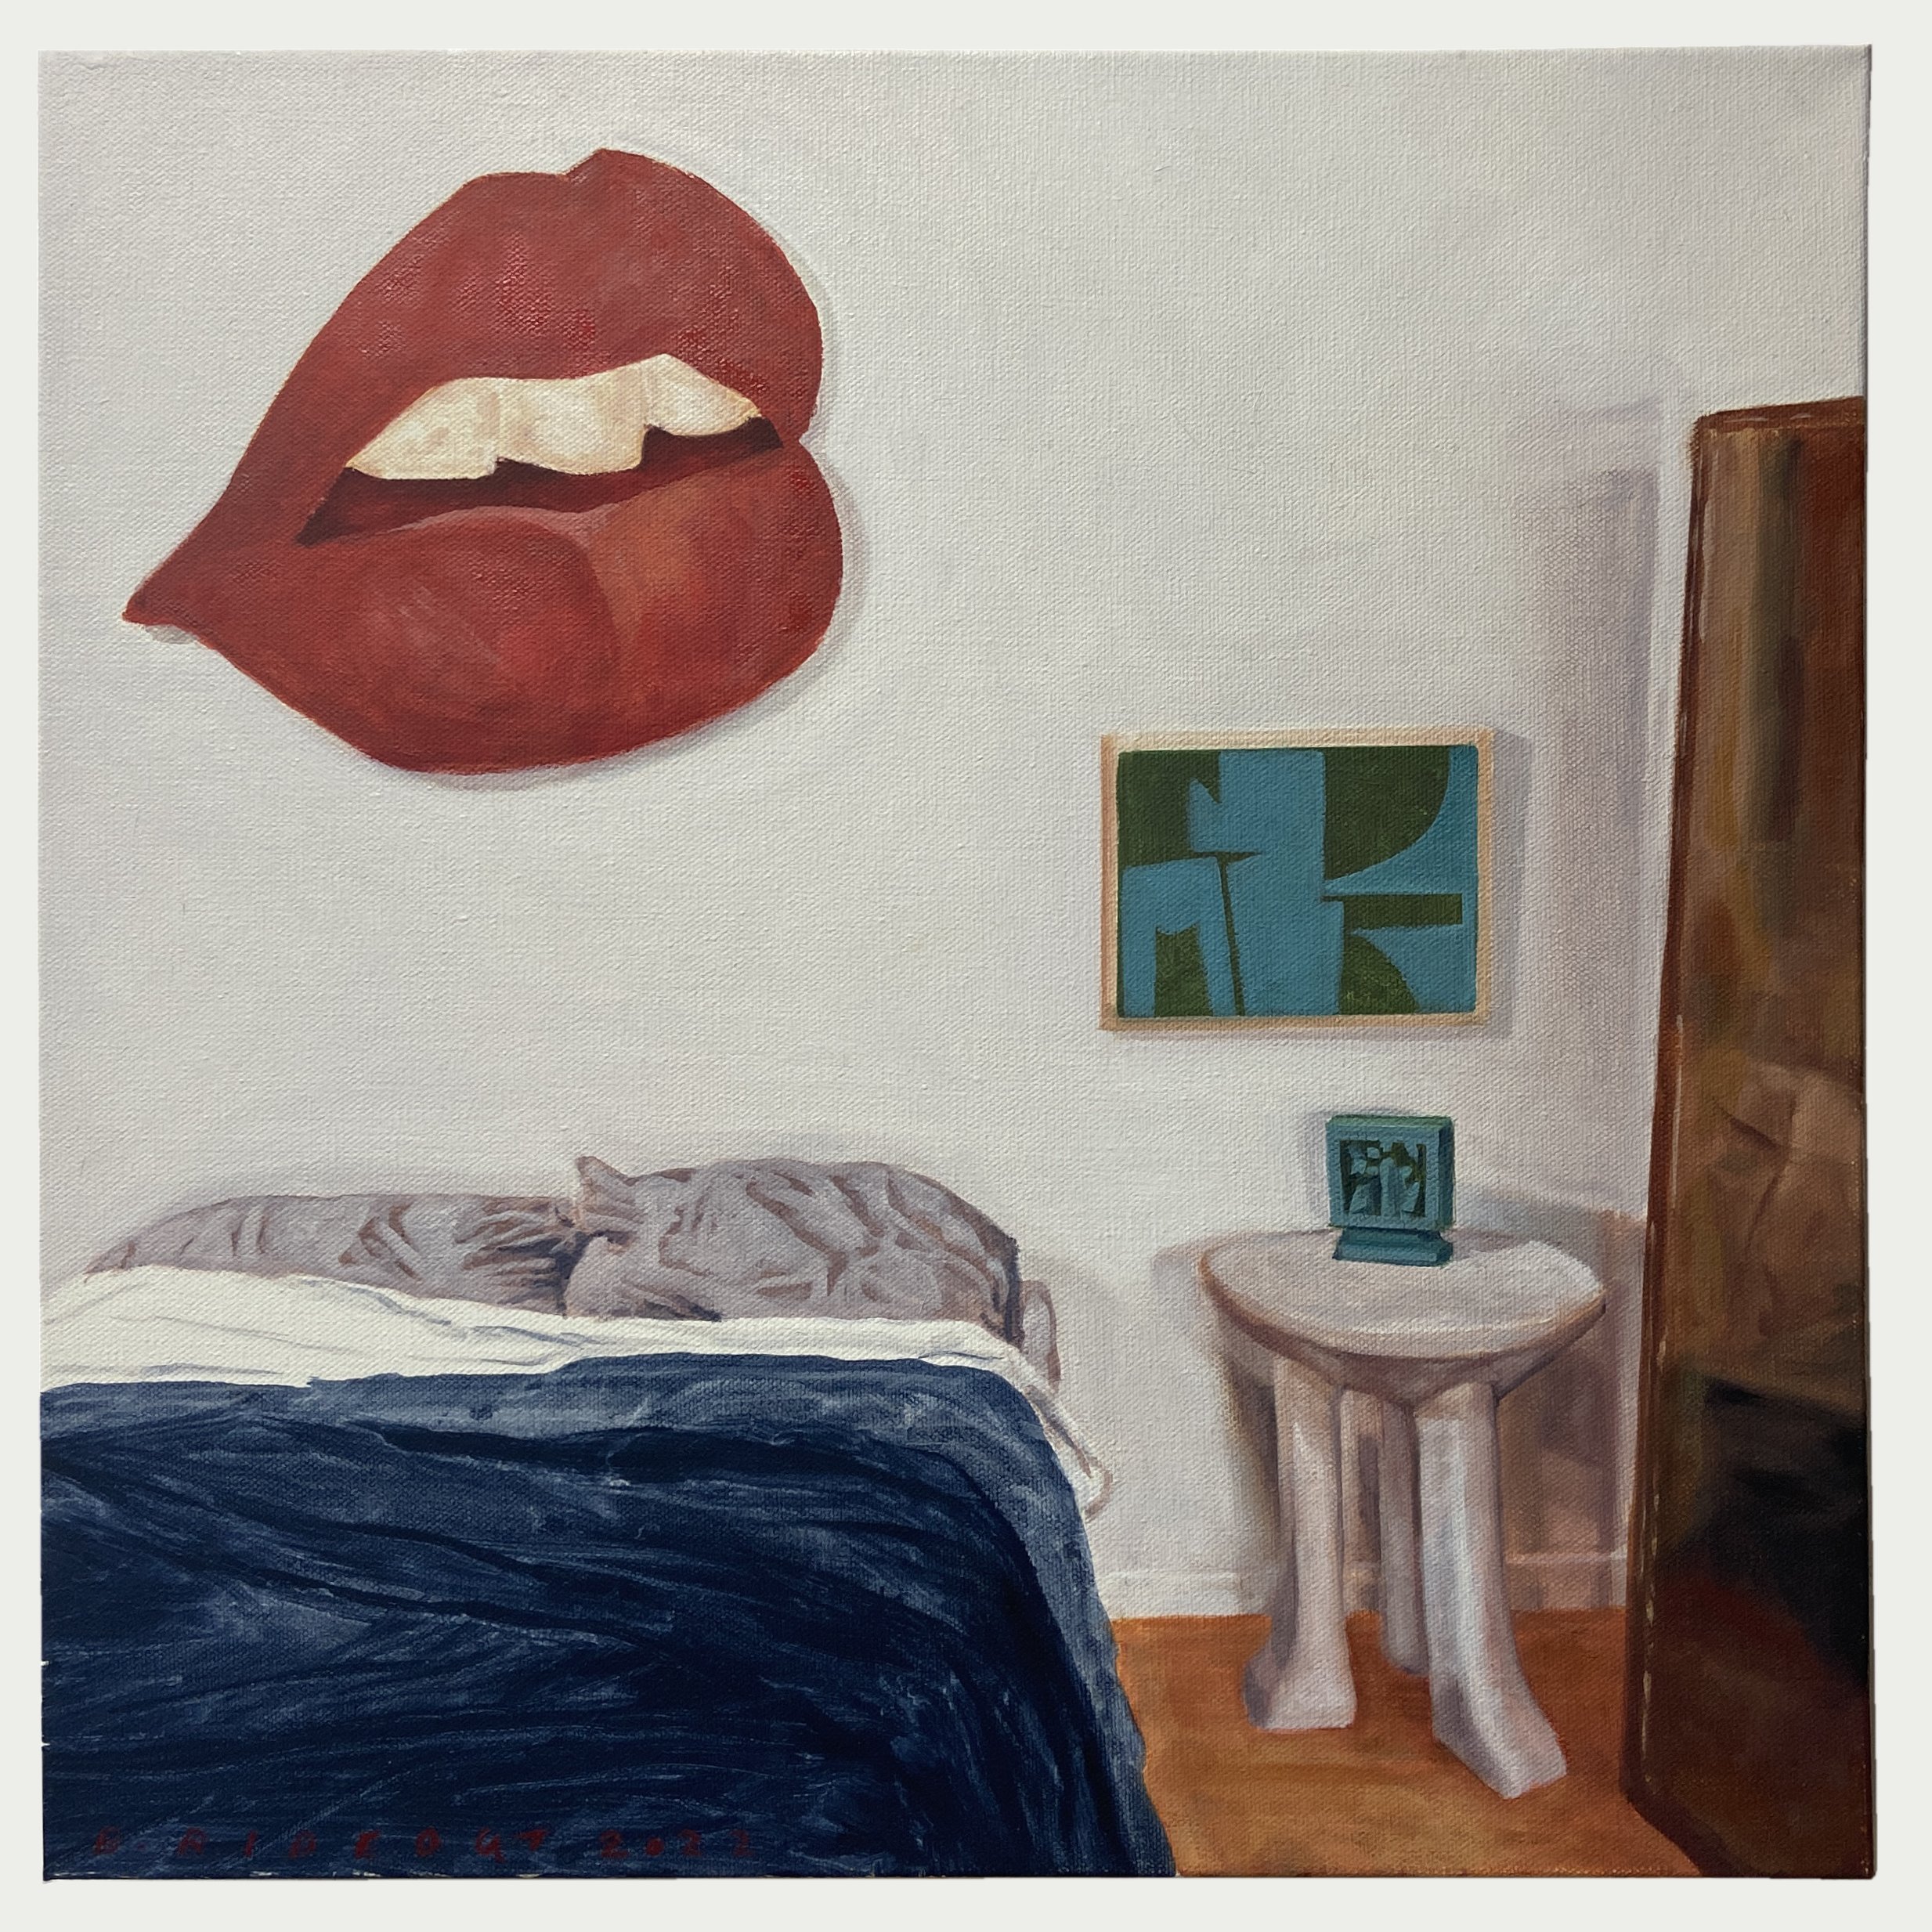  Study for ACP (Wesselmann)  2022  oil on canvas  18 x 18 in.  